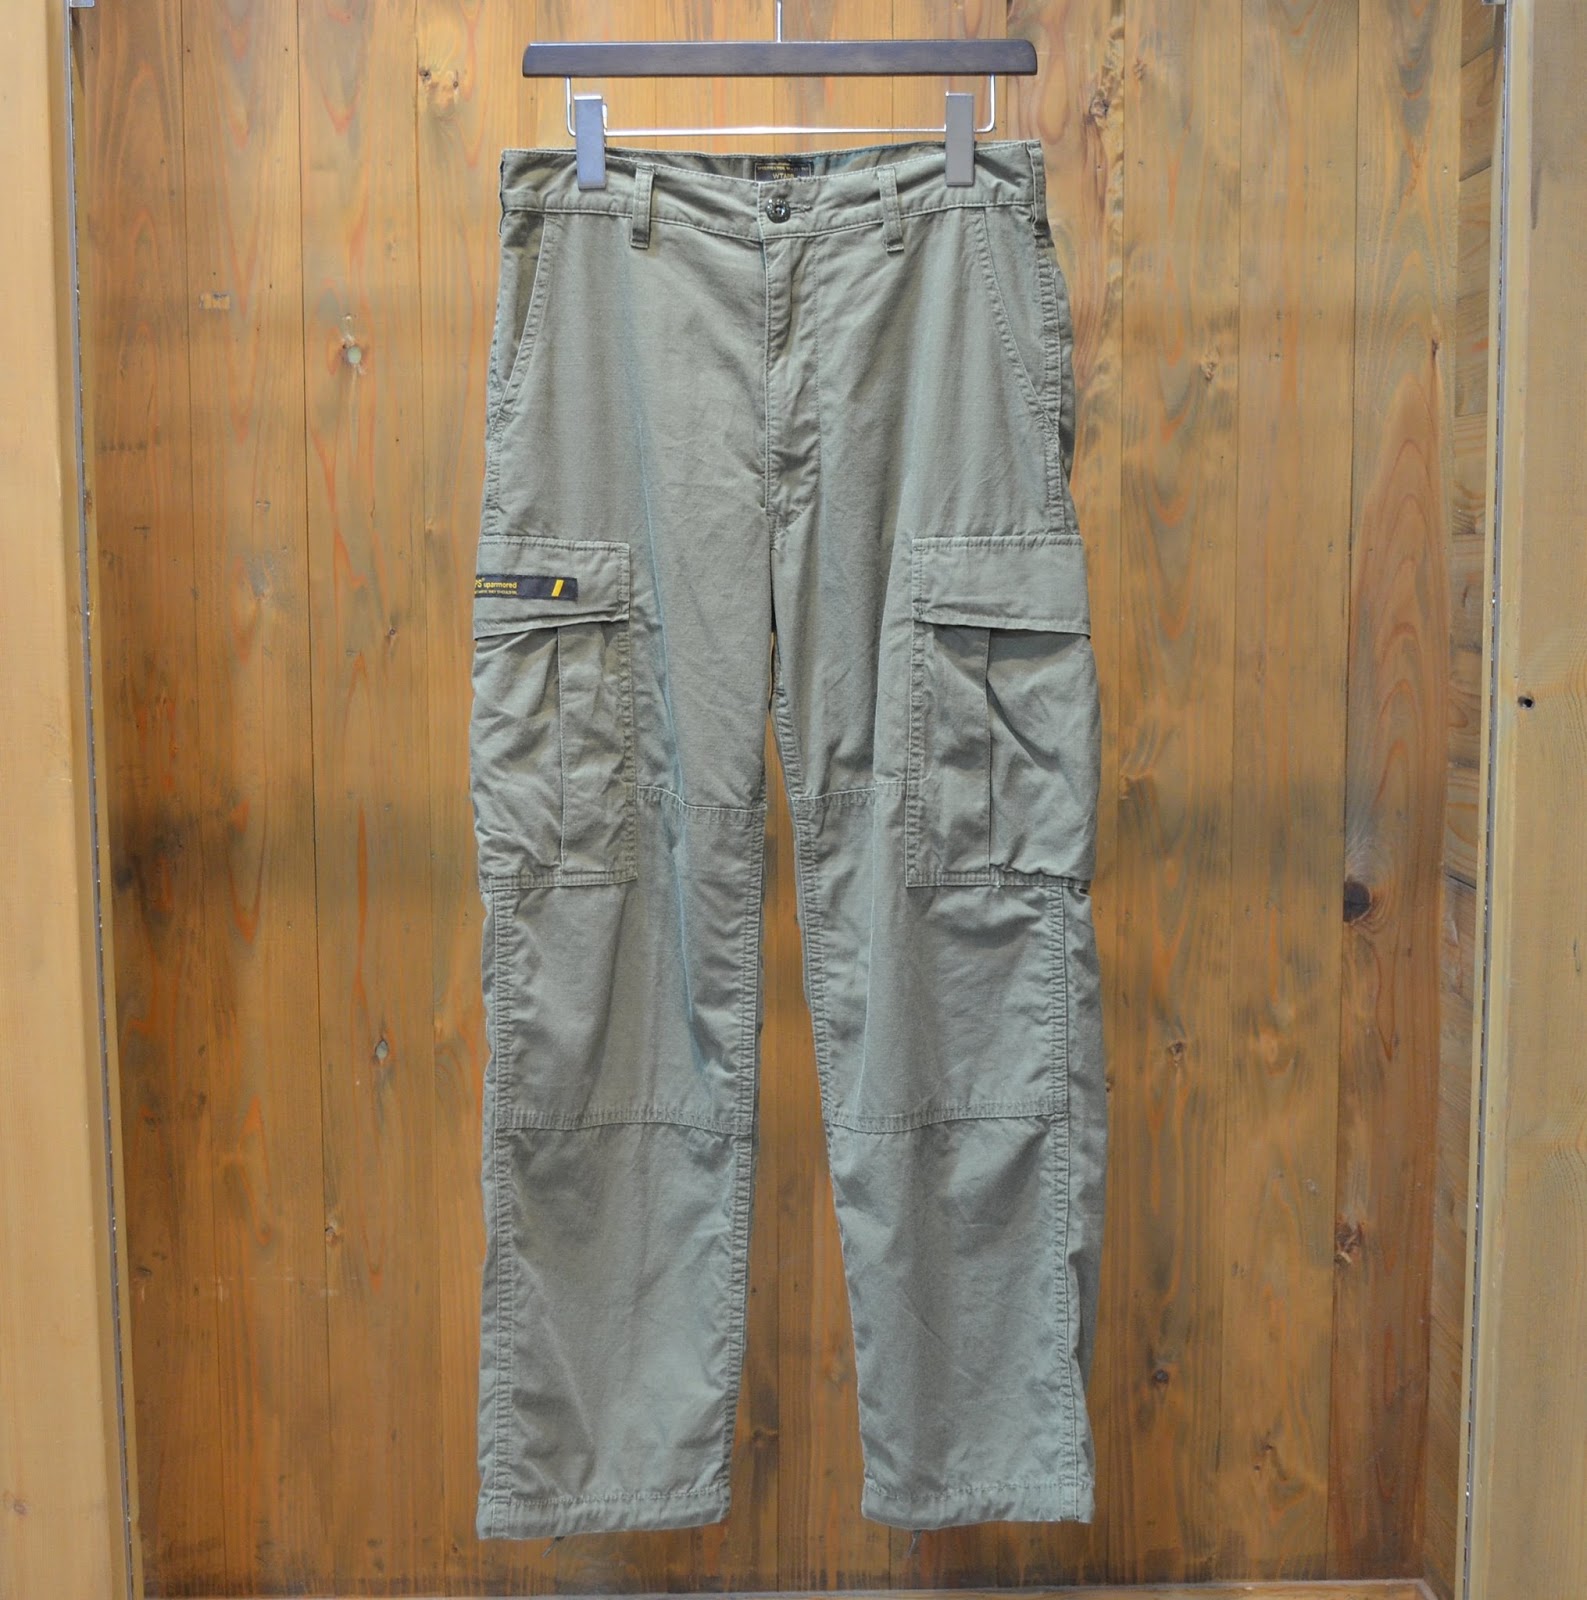 DIGRAG: 【NEW】WTAPS JUNGLE. STOCK / TROUSERS. COTTON. RIPSTOP 2016AW